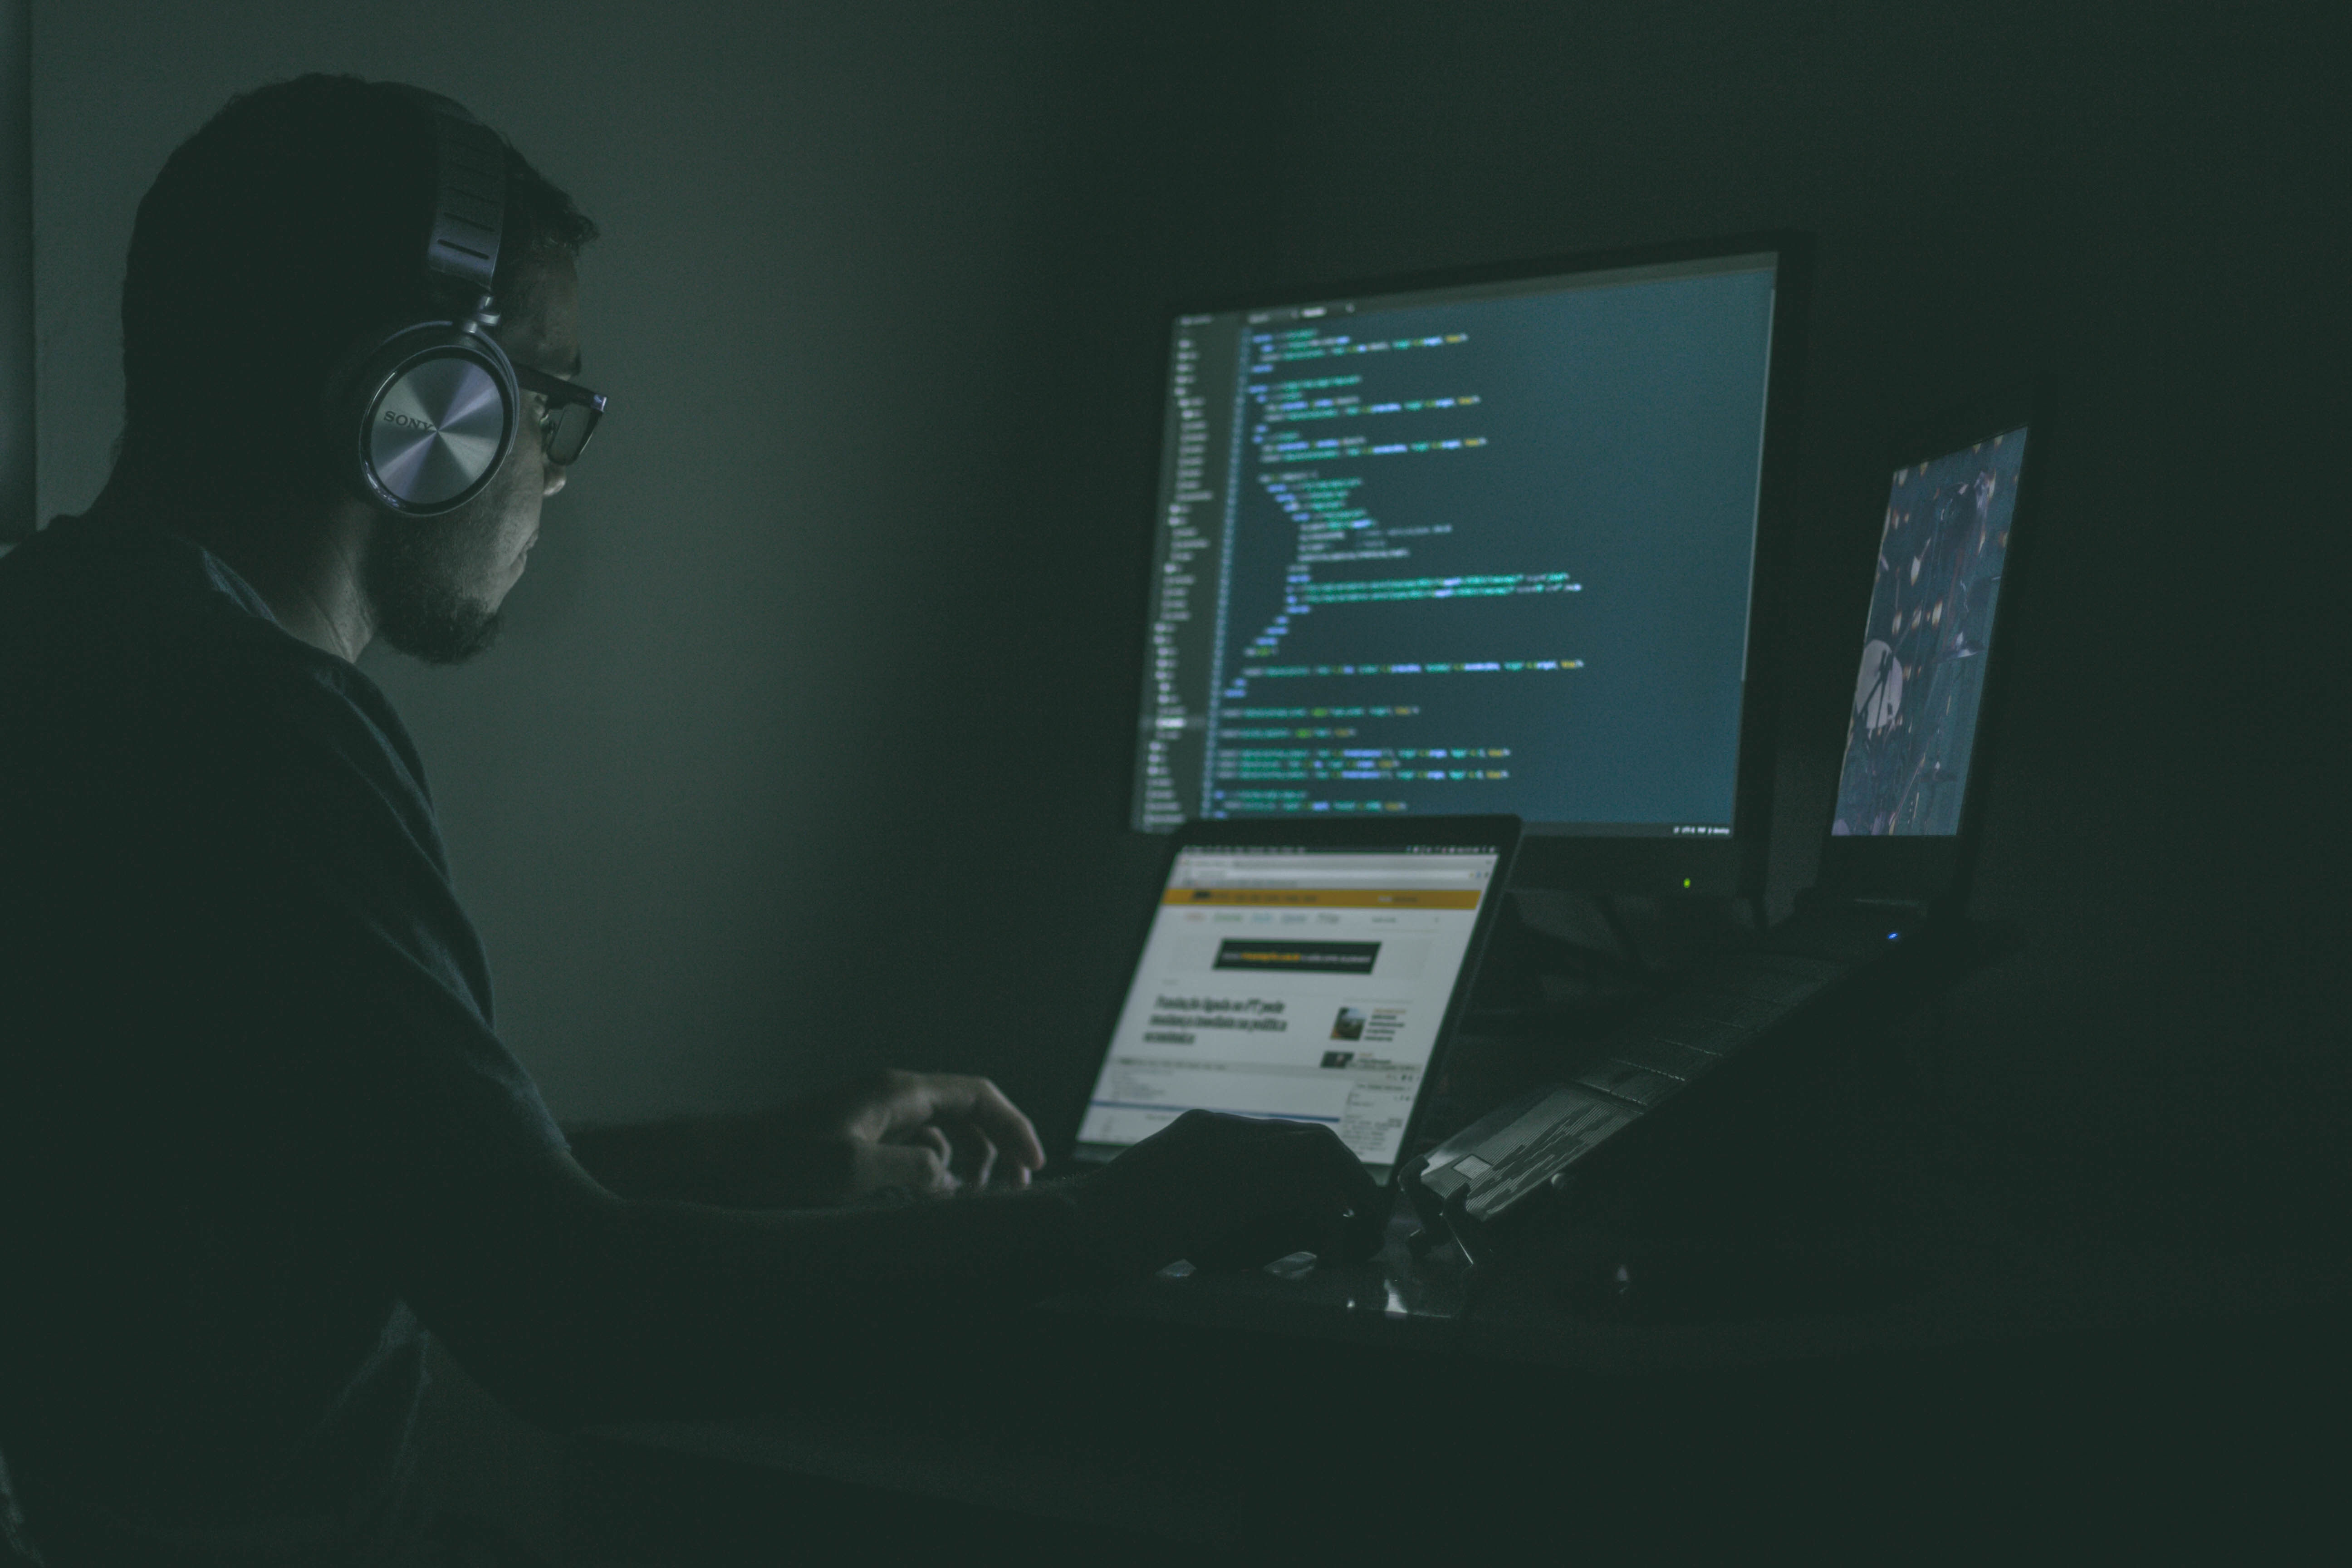 In order to protect your business image from cybercriminals, you’re going to need strong security protocols. (PHOTO: Jefferson Santos/Unsplash)